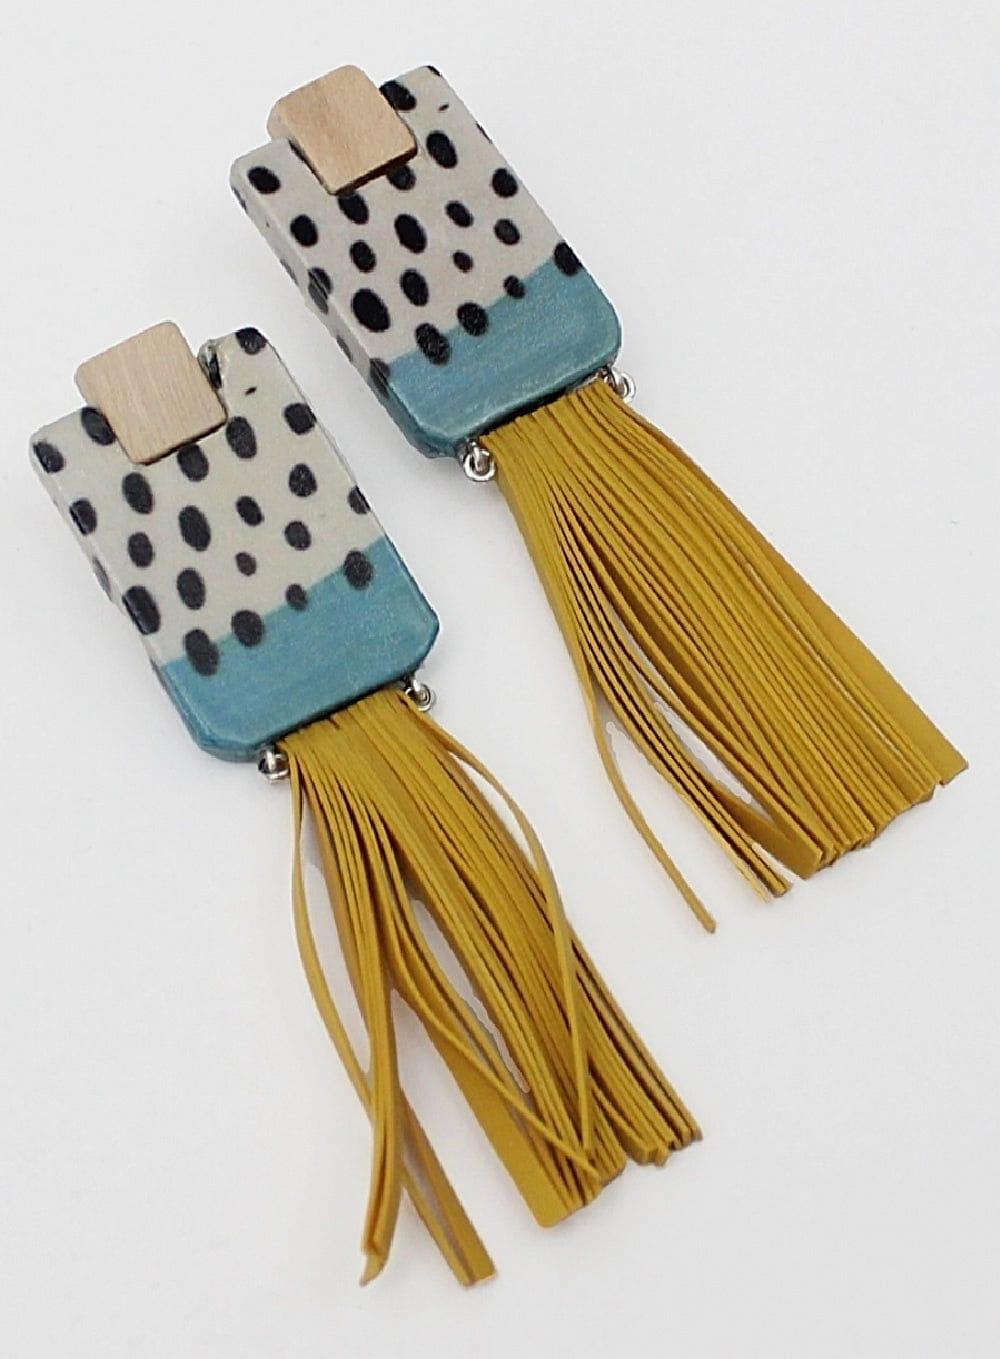 Rectangle wooden earrings with mustard colored tassels hanging from the bottom edge. The earring is colored white and blue with black dots.